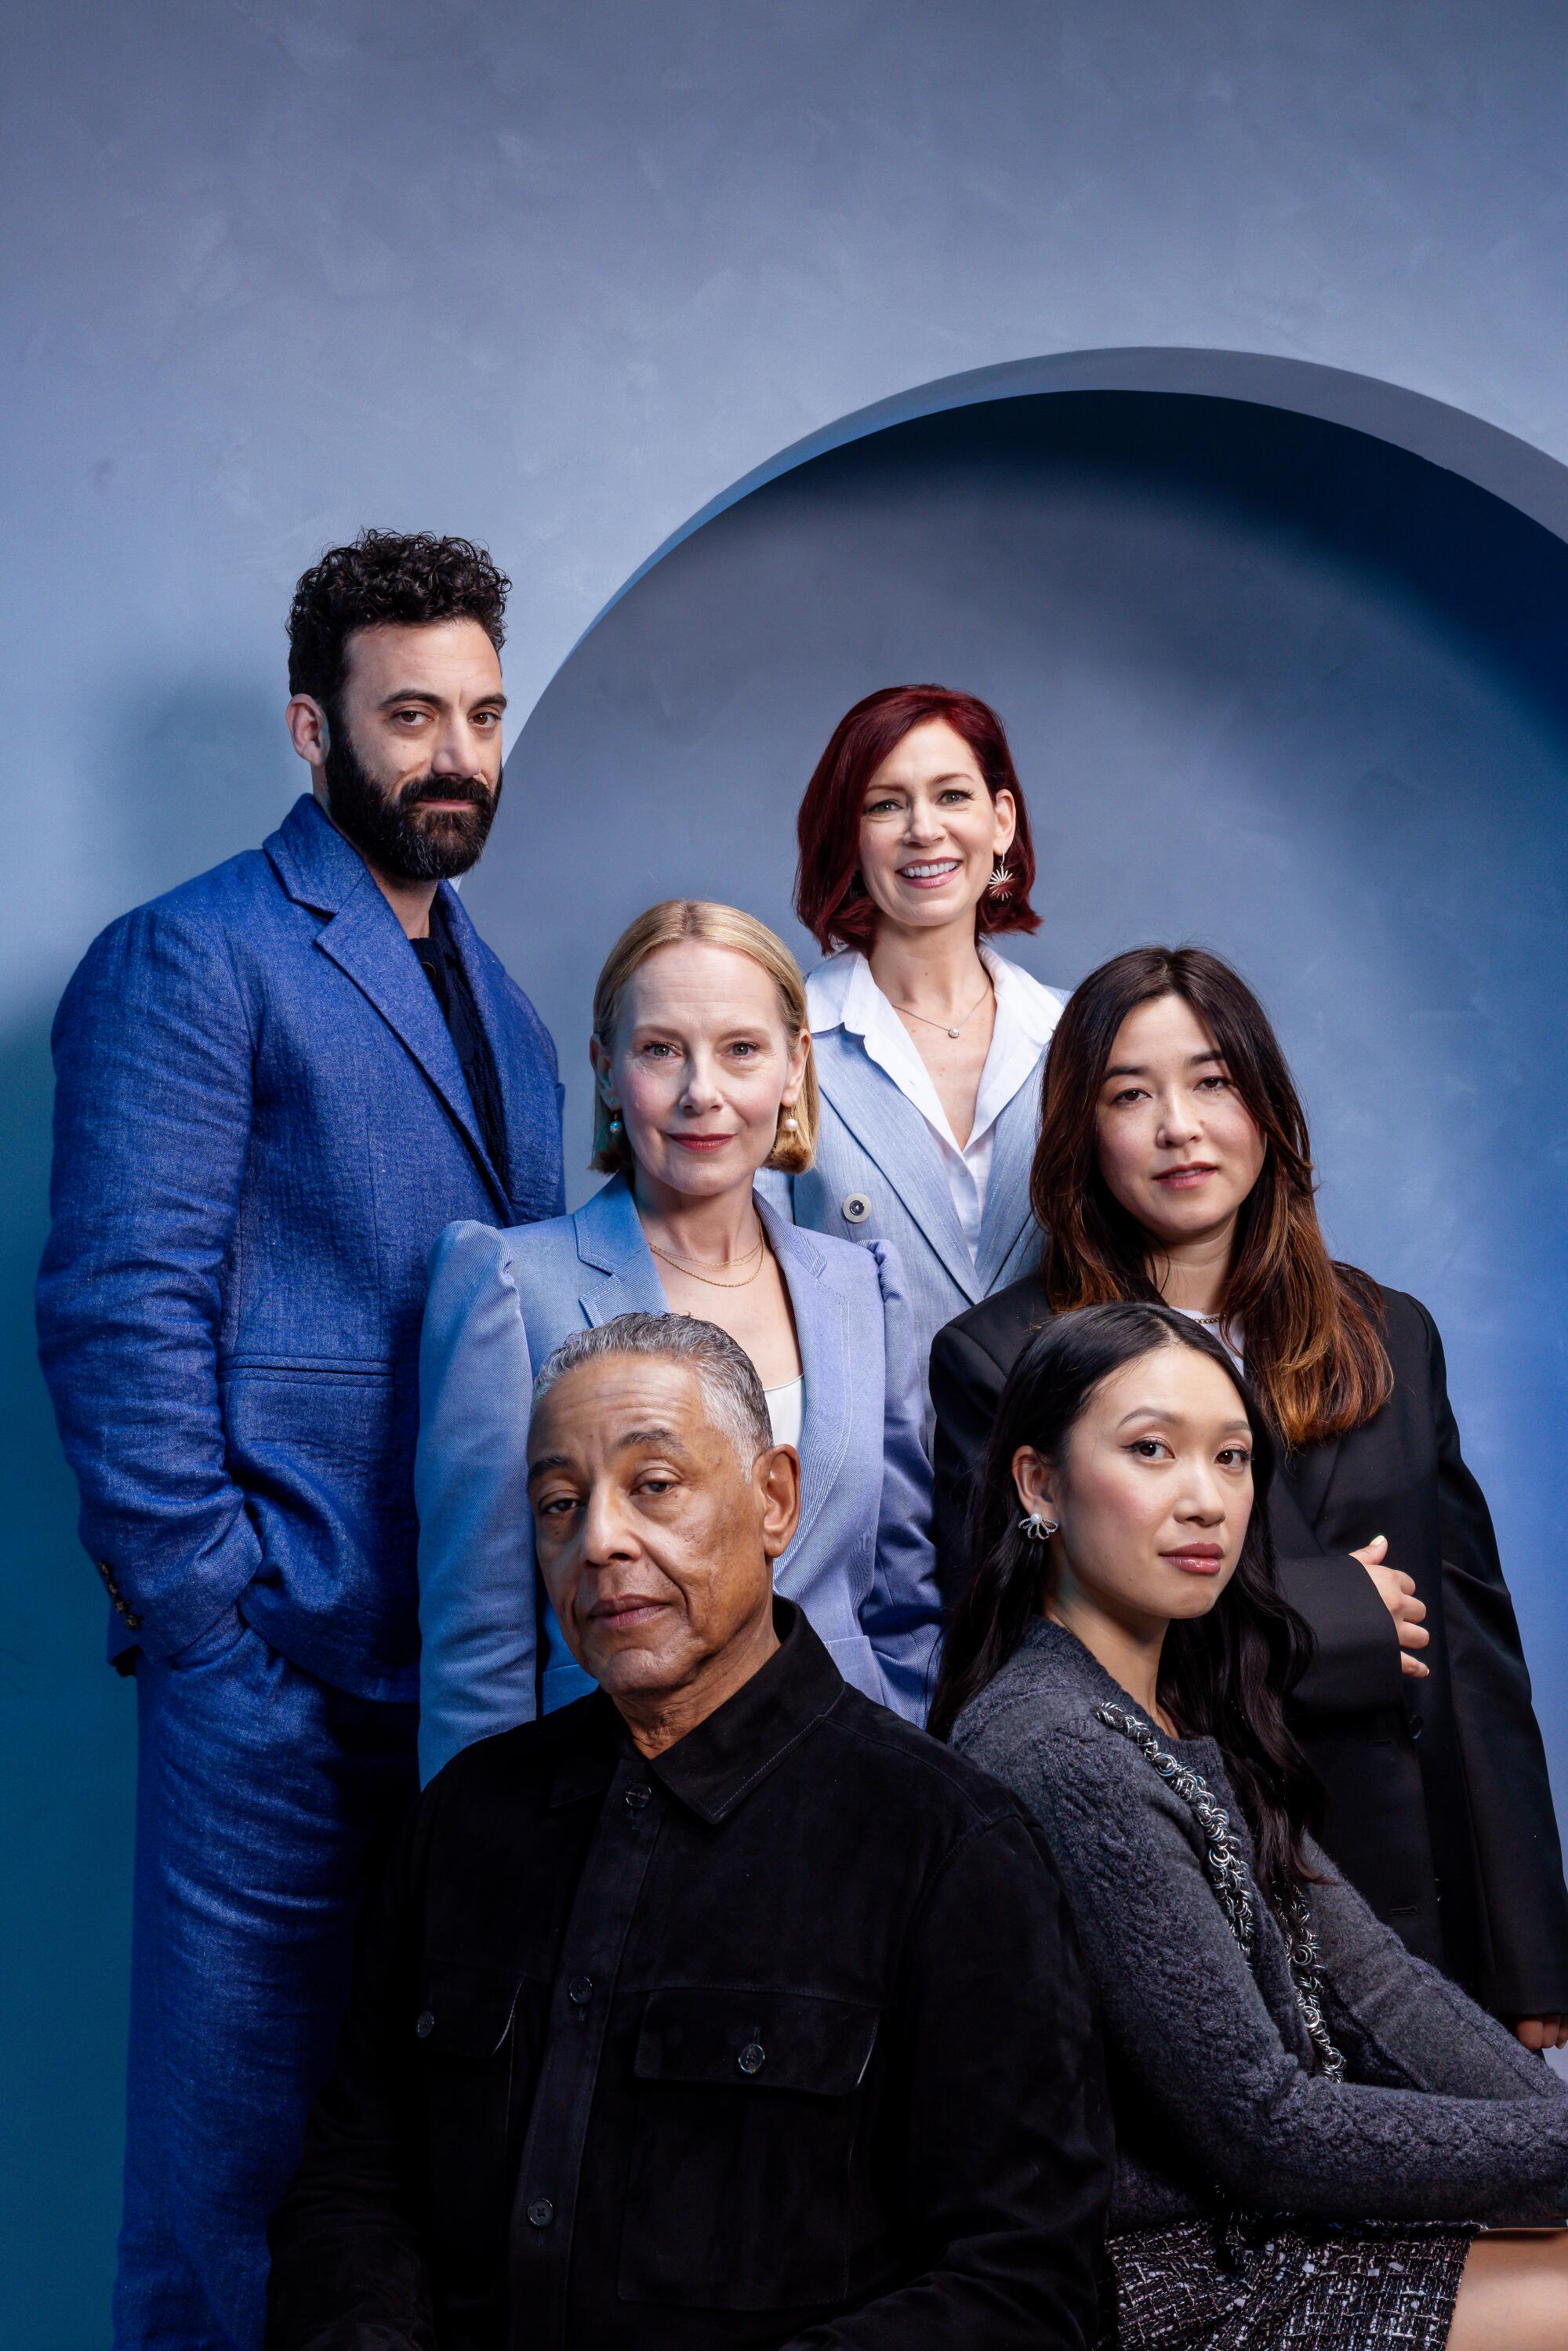 Maya Erskine, Giancarlo Esposito, Jess Hong, Carrie Preston, Amy Ryan and Morgan Spector group together for a portrait.